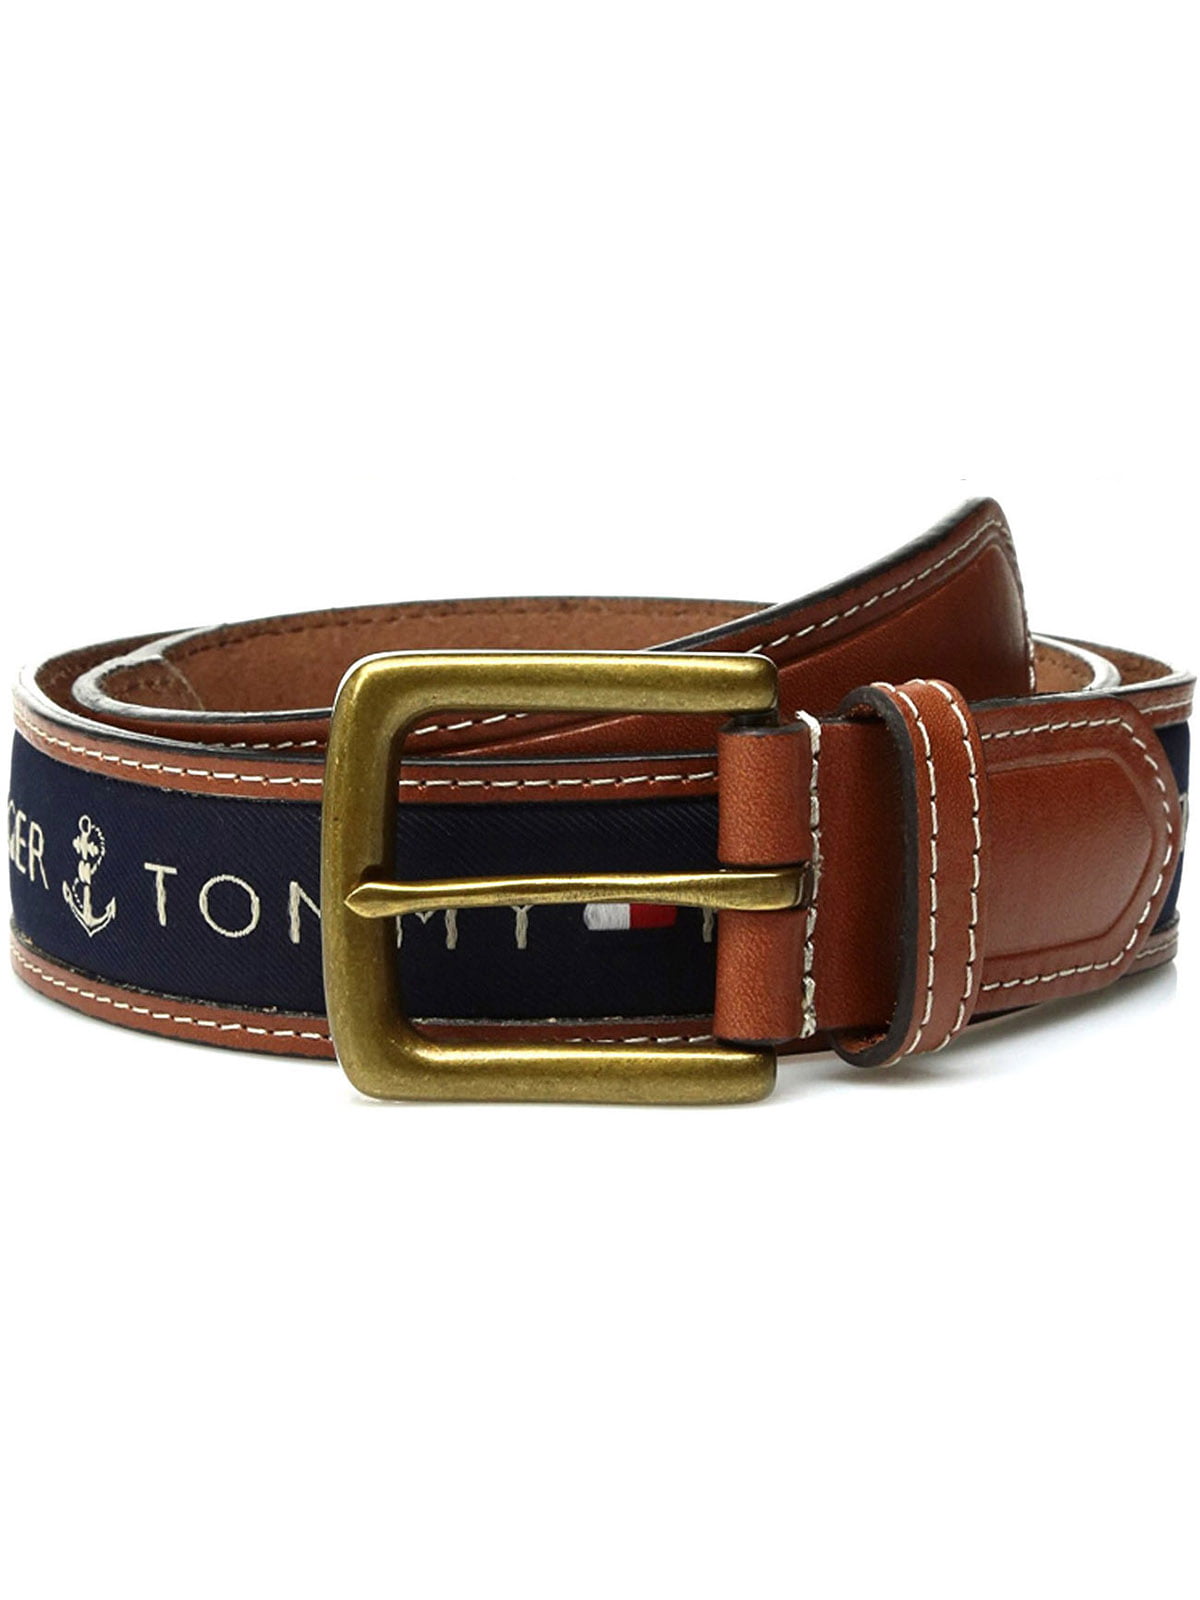 Fabric Belt with Single Prong Buckle Tommy Hilfiger Mens Ribbon Inlay Belt